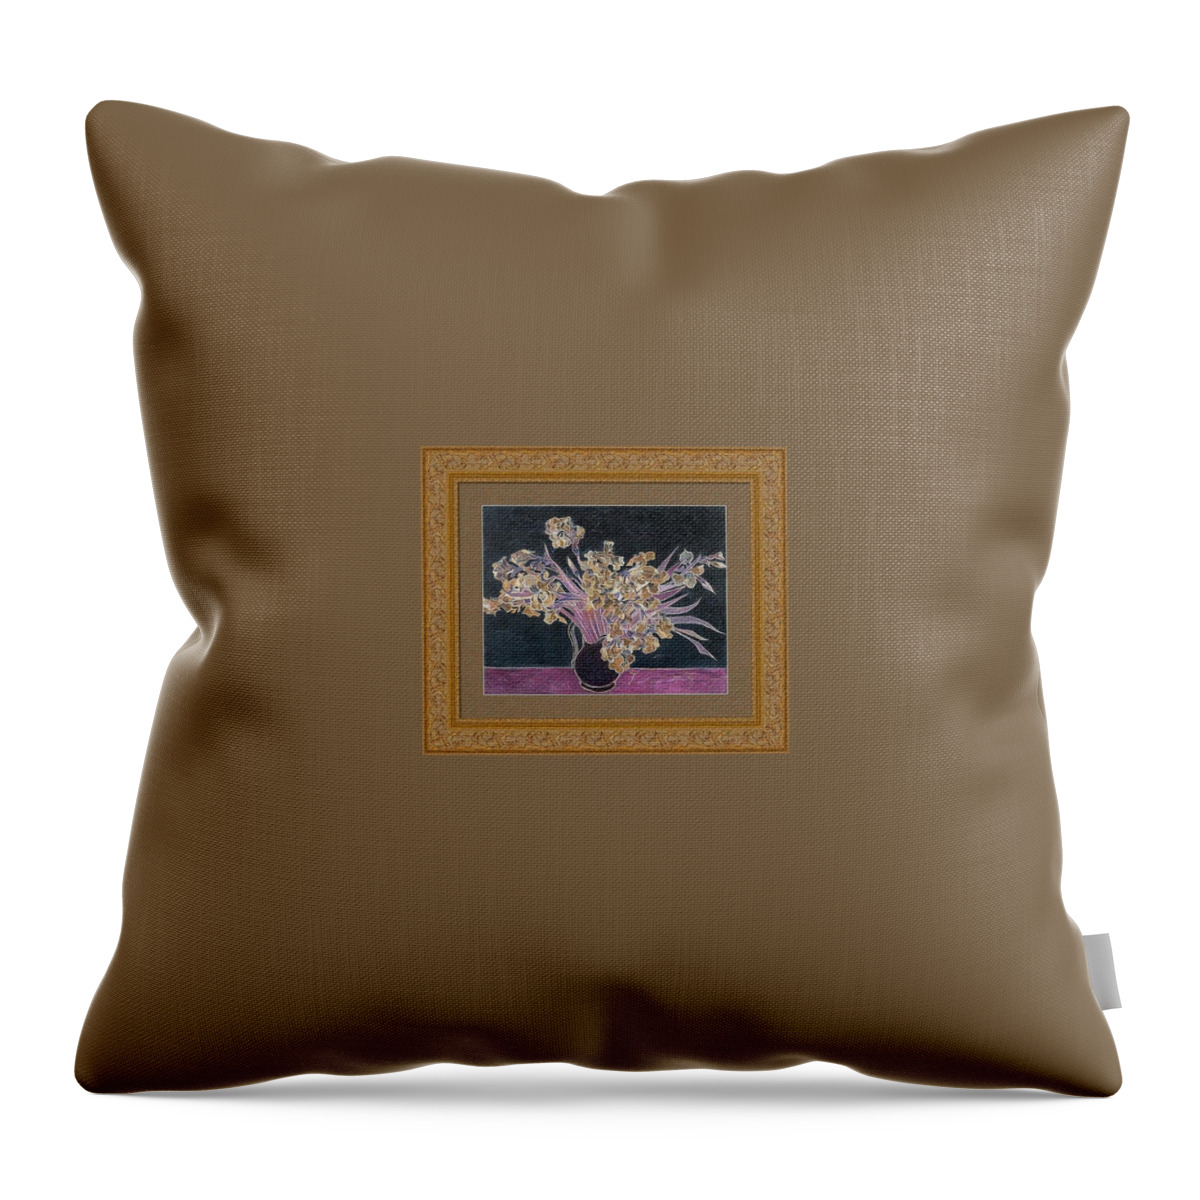  Throw Pillow featuring the digital art Rustic Collection by David Bridburg